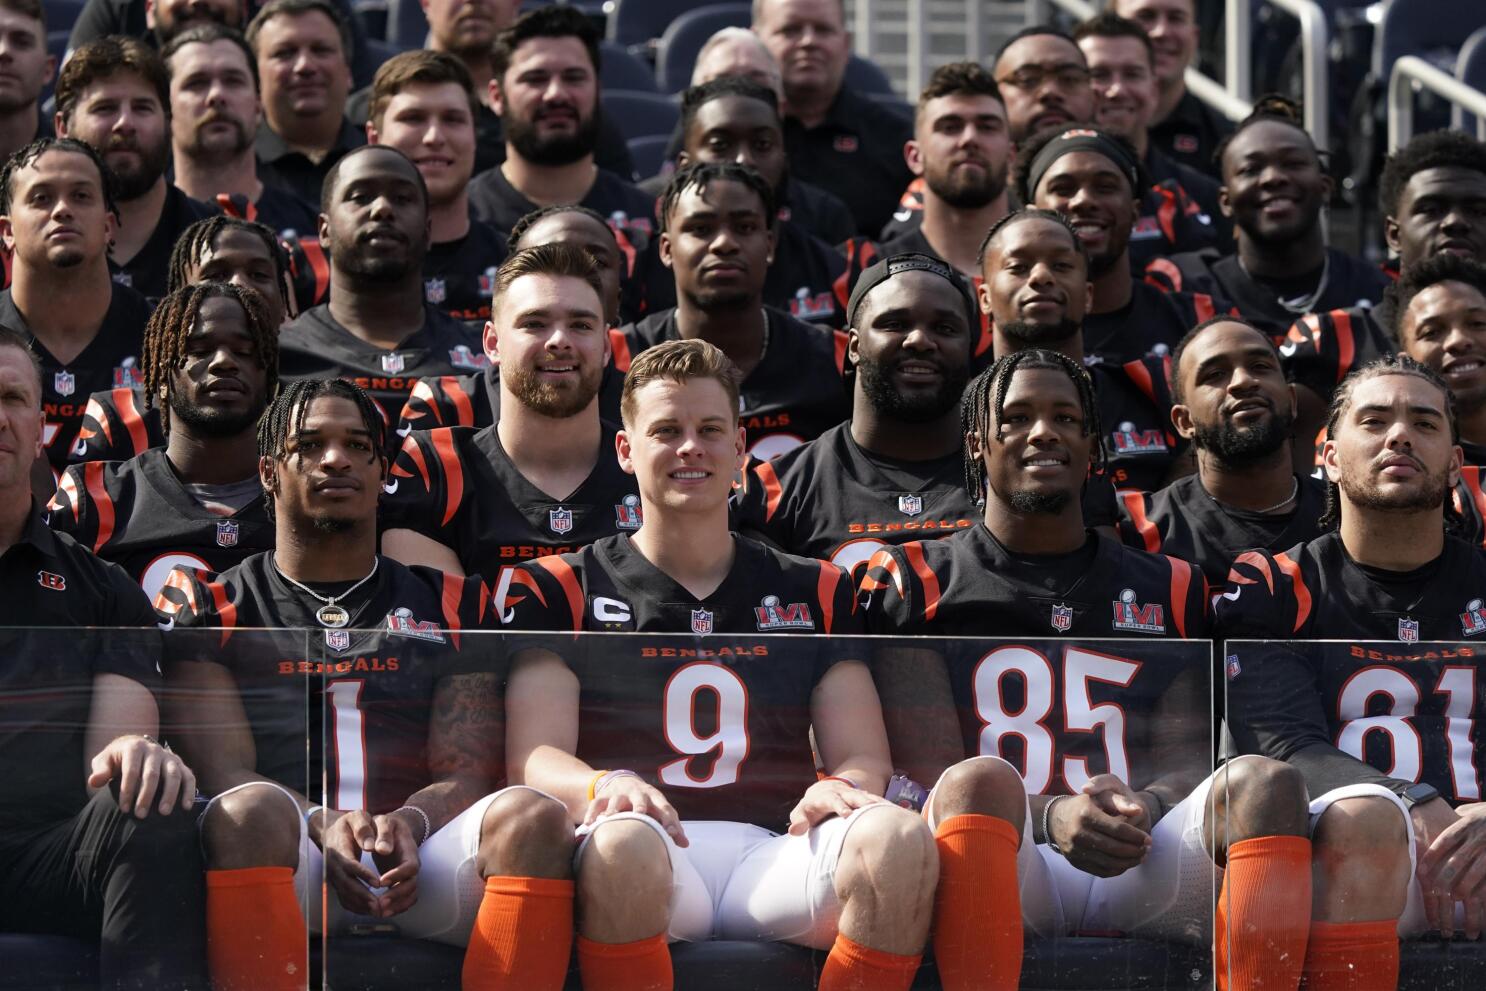 football team the bengals